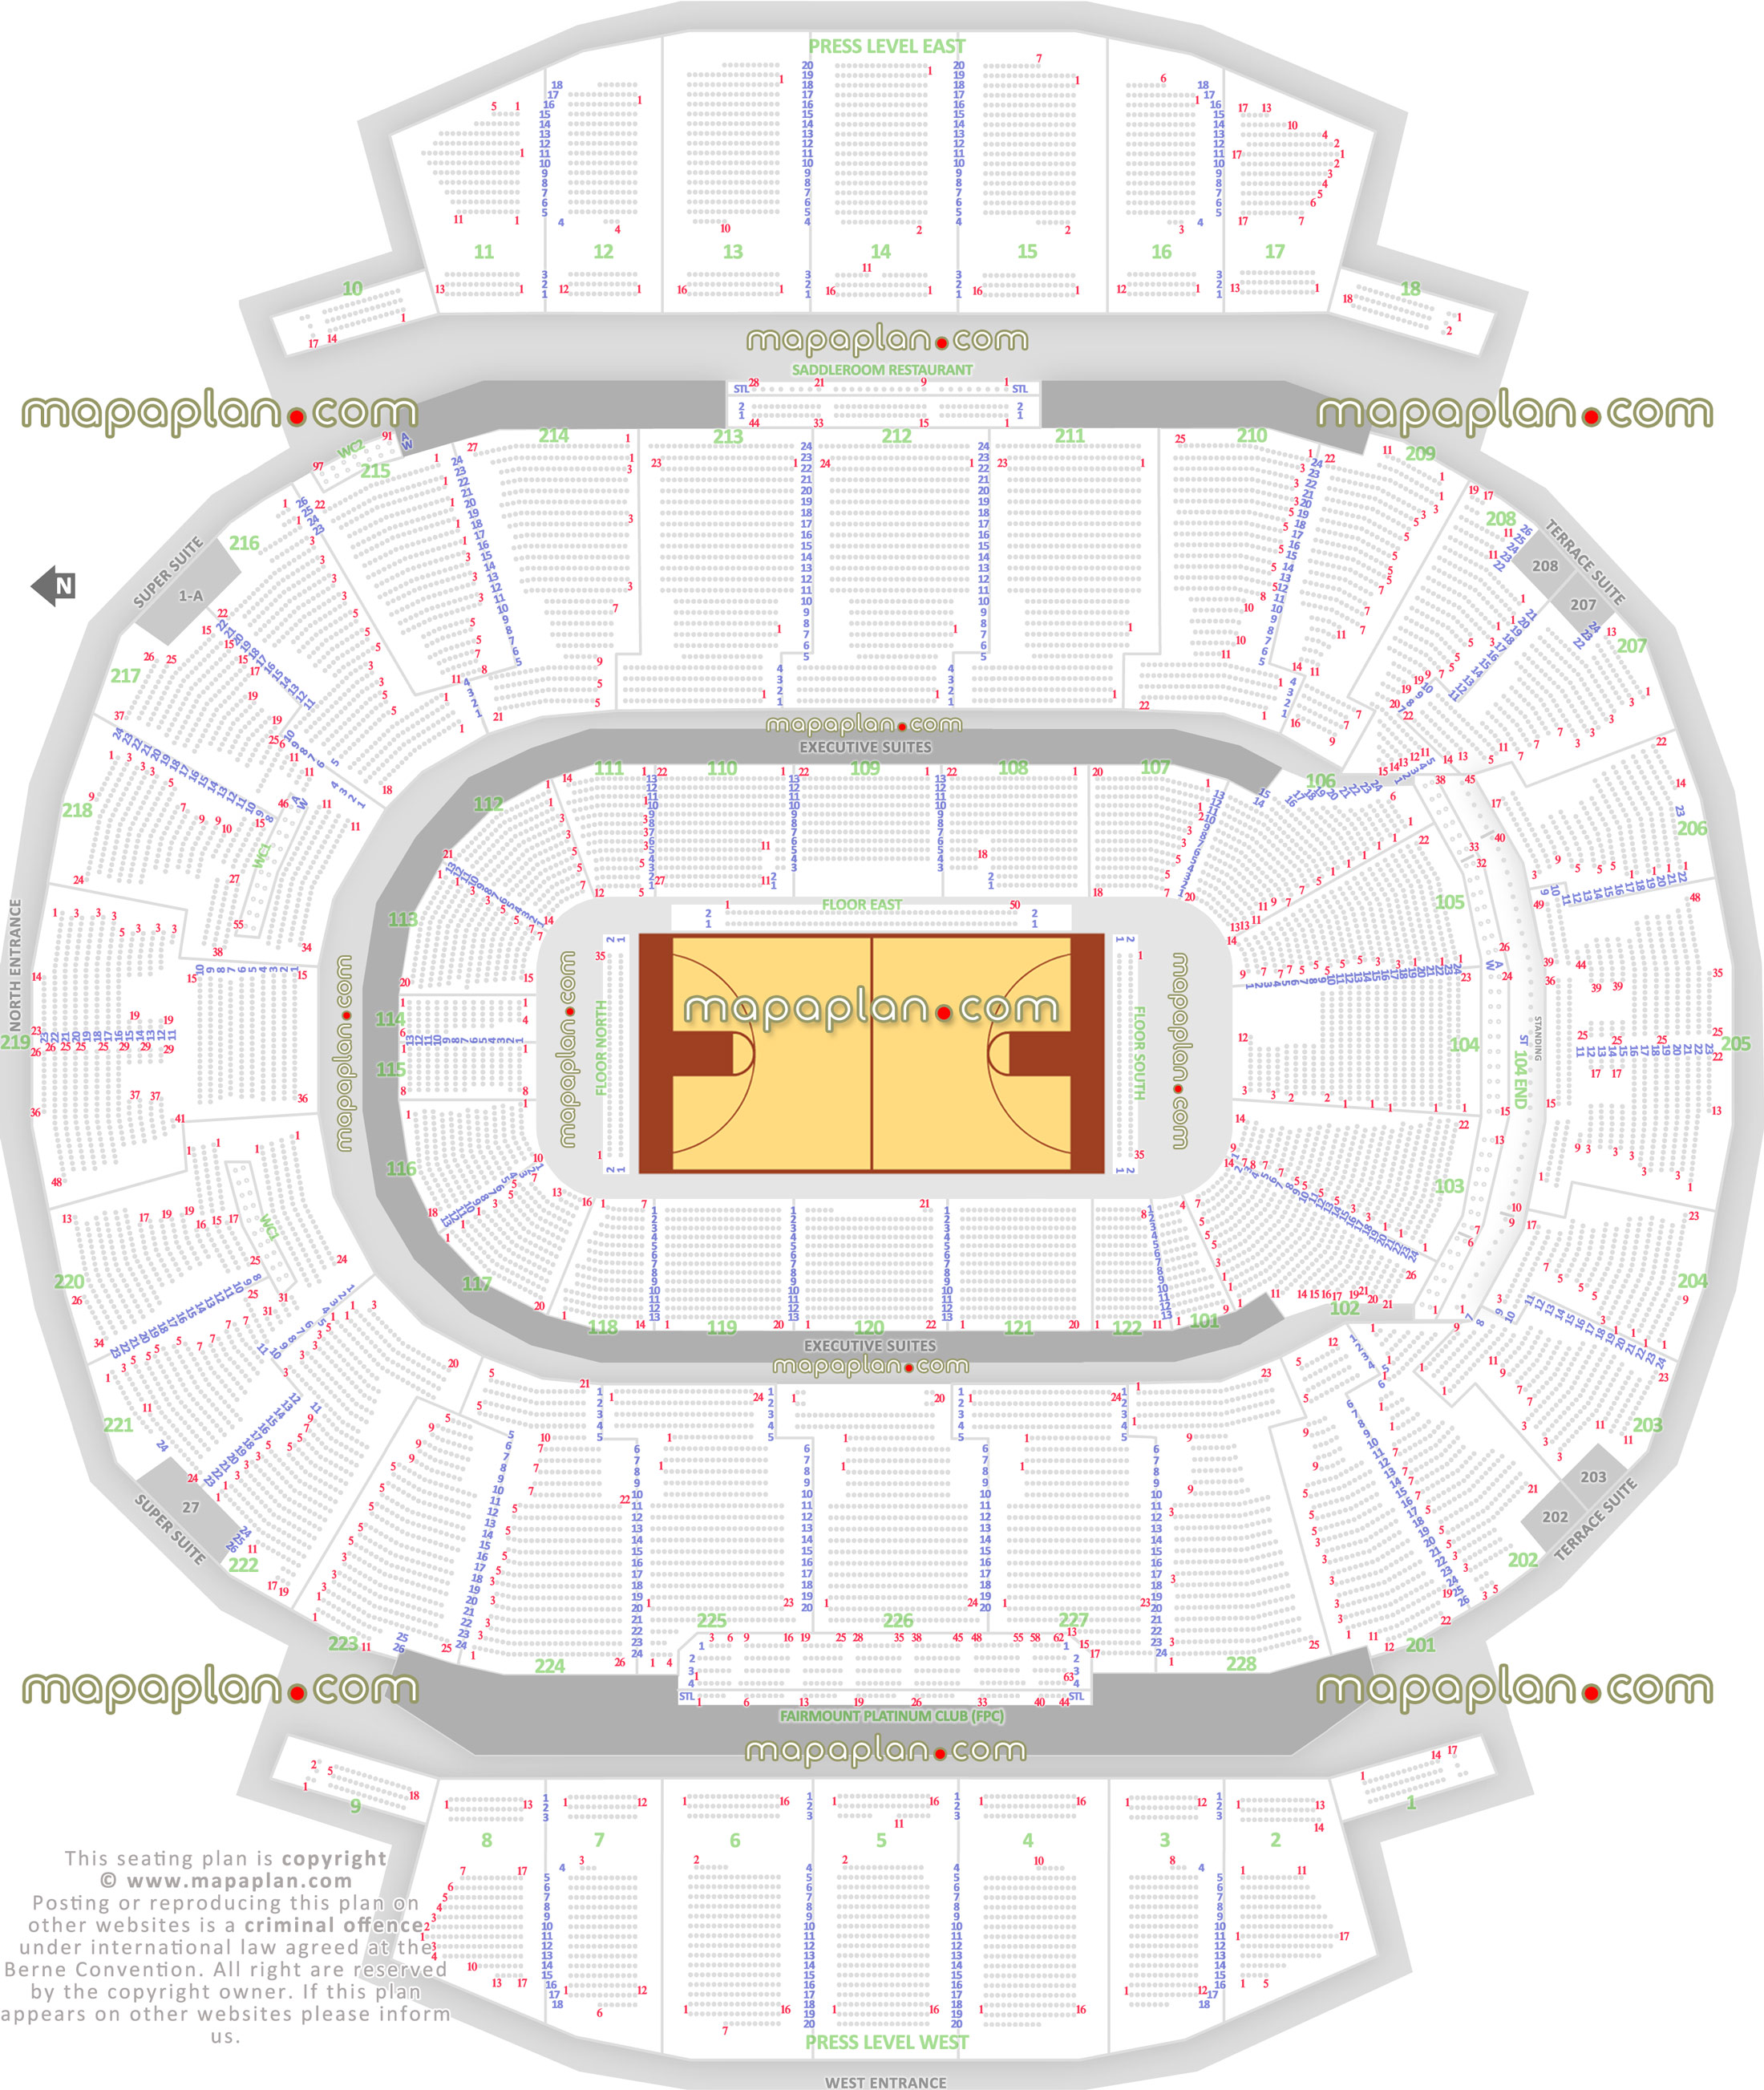 basketball games arena seating capacity arrangement diagram scotia center saddledome arena alberta interactive virtual 3d detailed layout level 1 club level 2 press level 3 stadium bowl sections full exact row numbers plan seats each row sections north west east entrances exits maps Calgary Scotiabank Saddledome seating chart